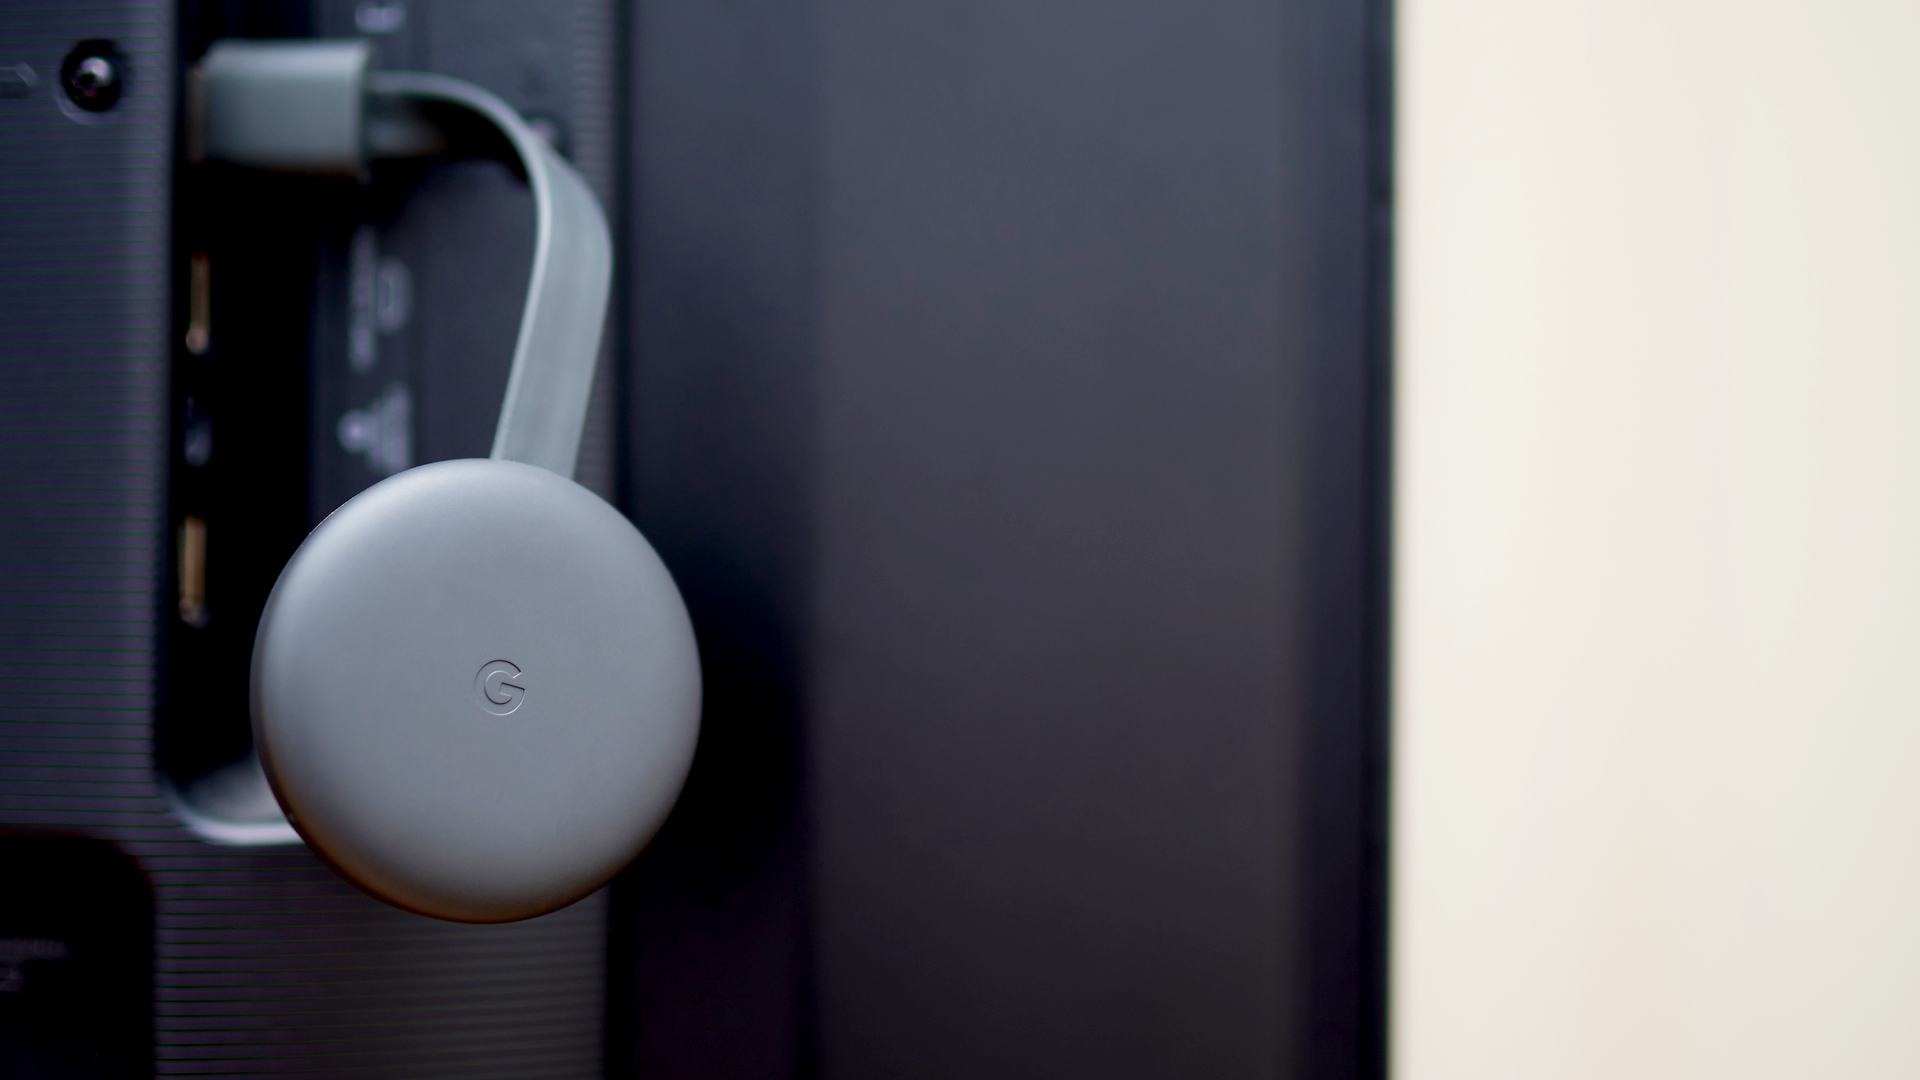 How To Set Up Chromecast In 5 Simple Steps